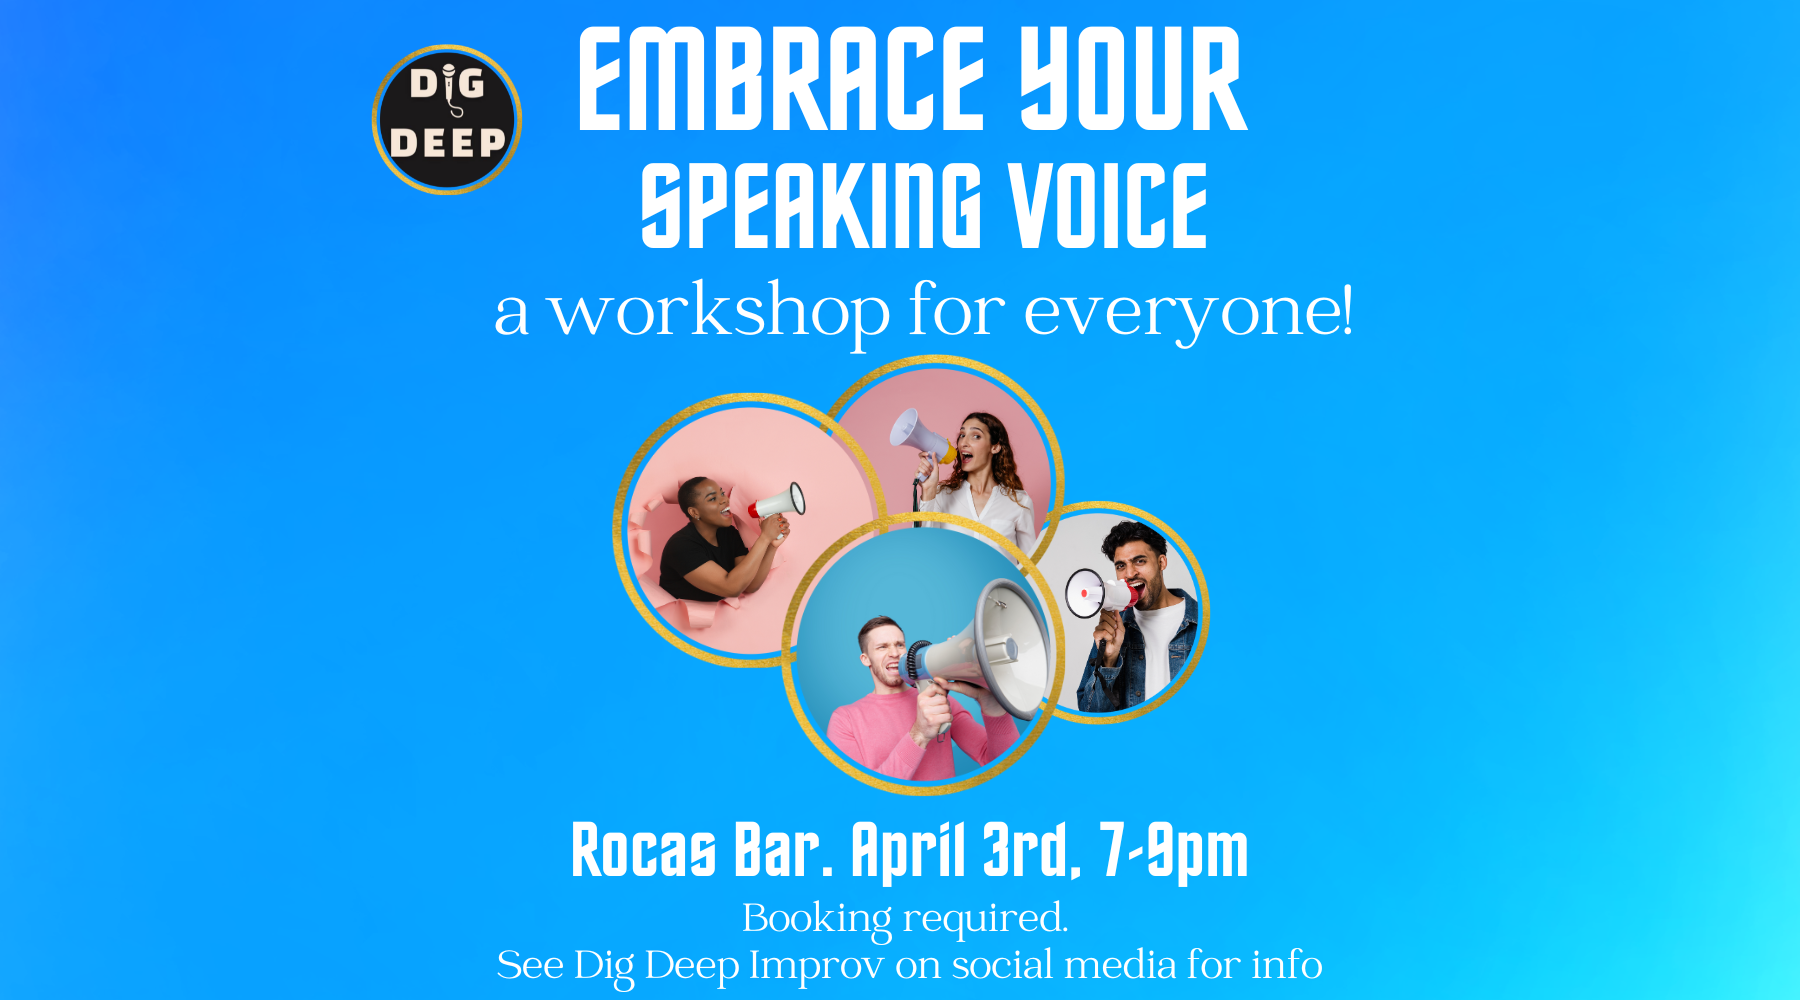 Embrace your speaking voice: a workshop for everyone!